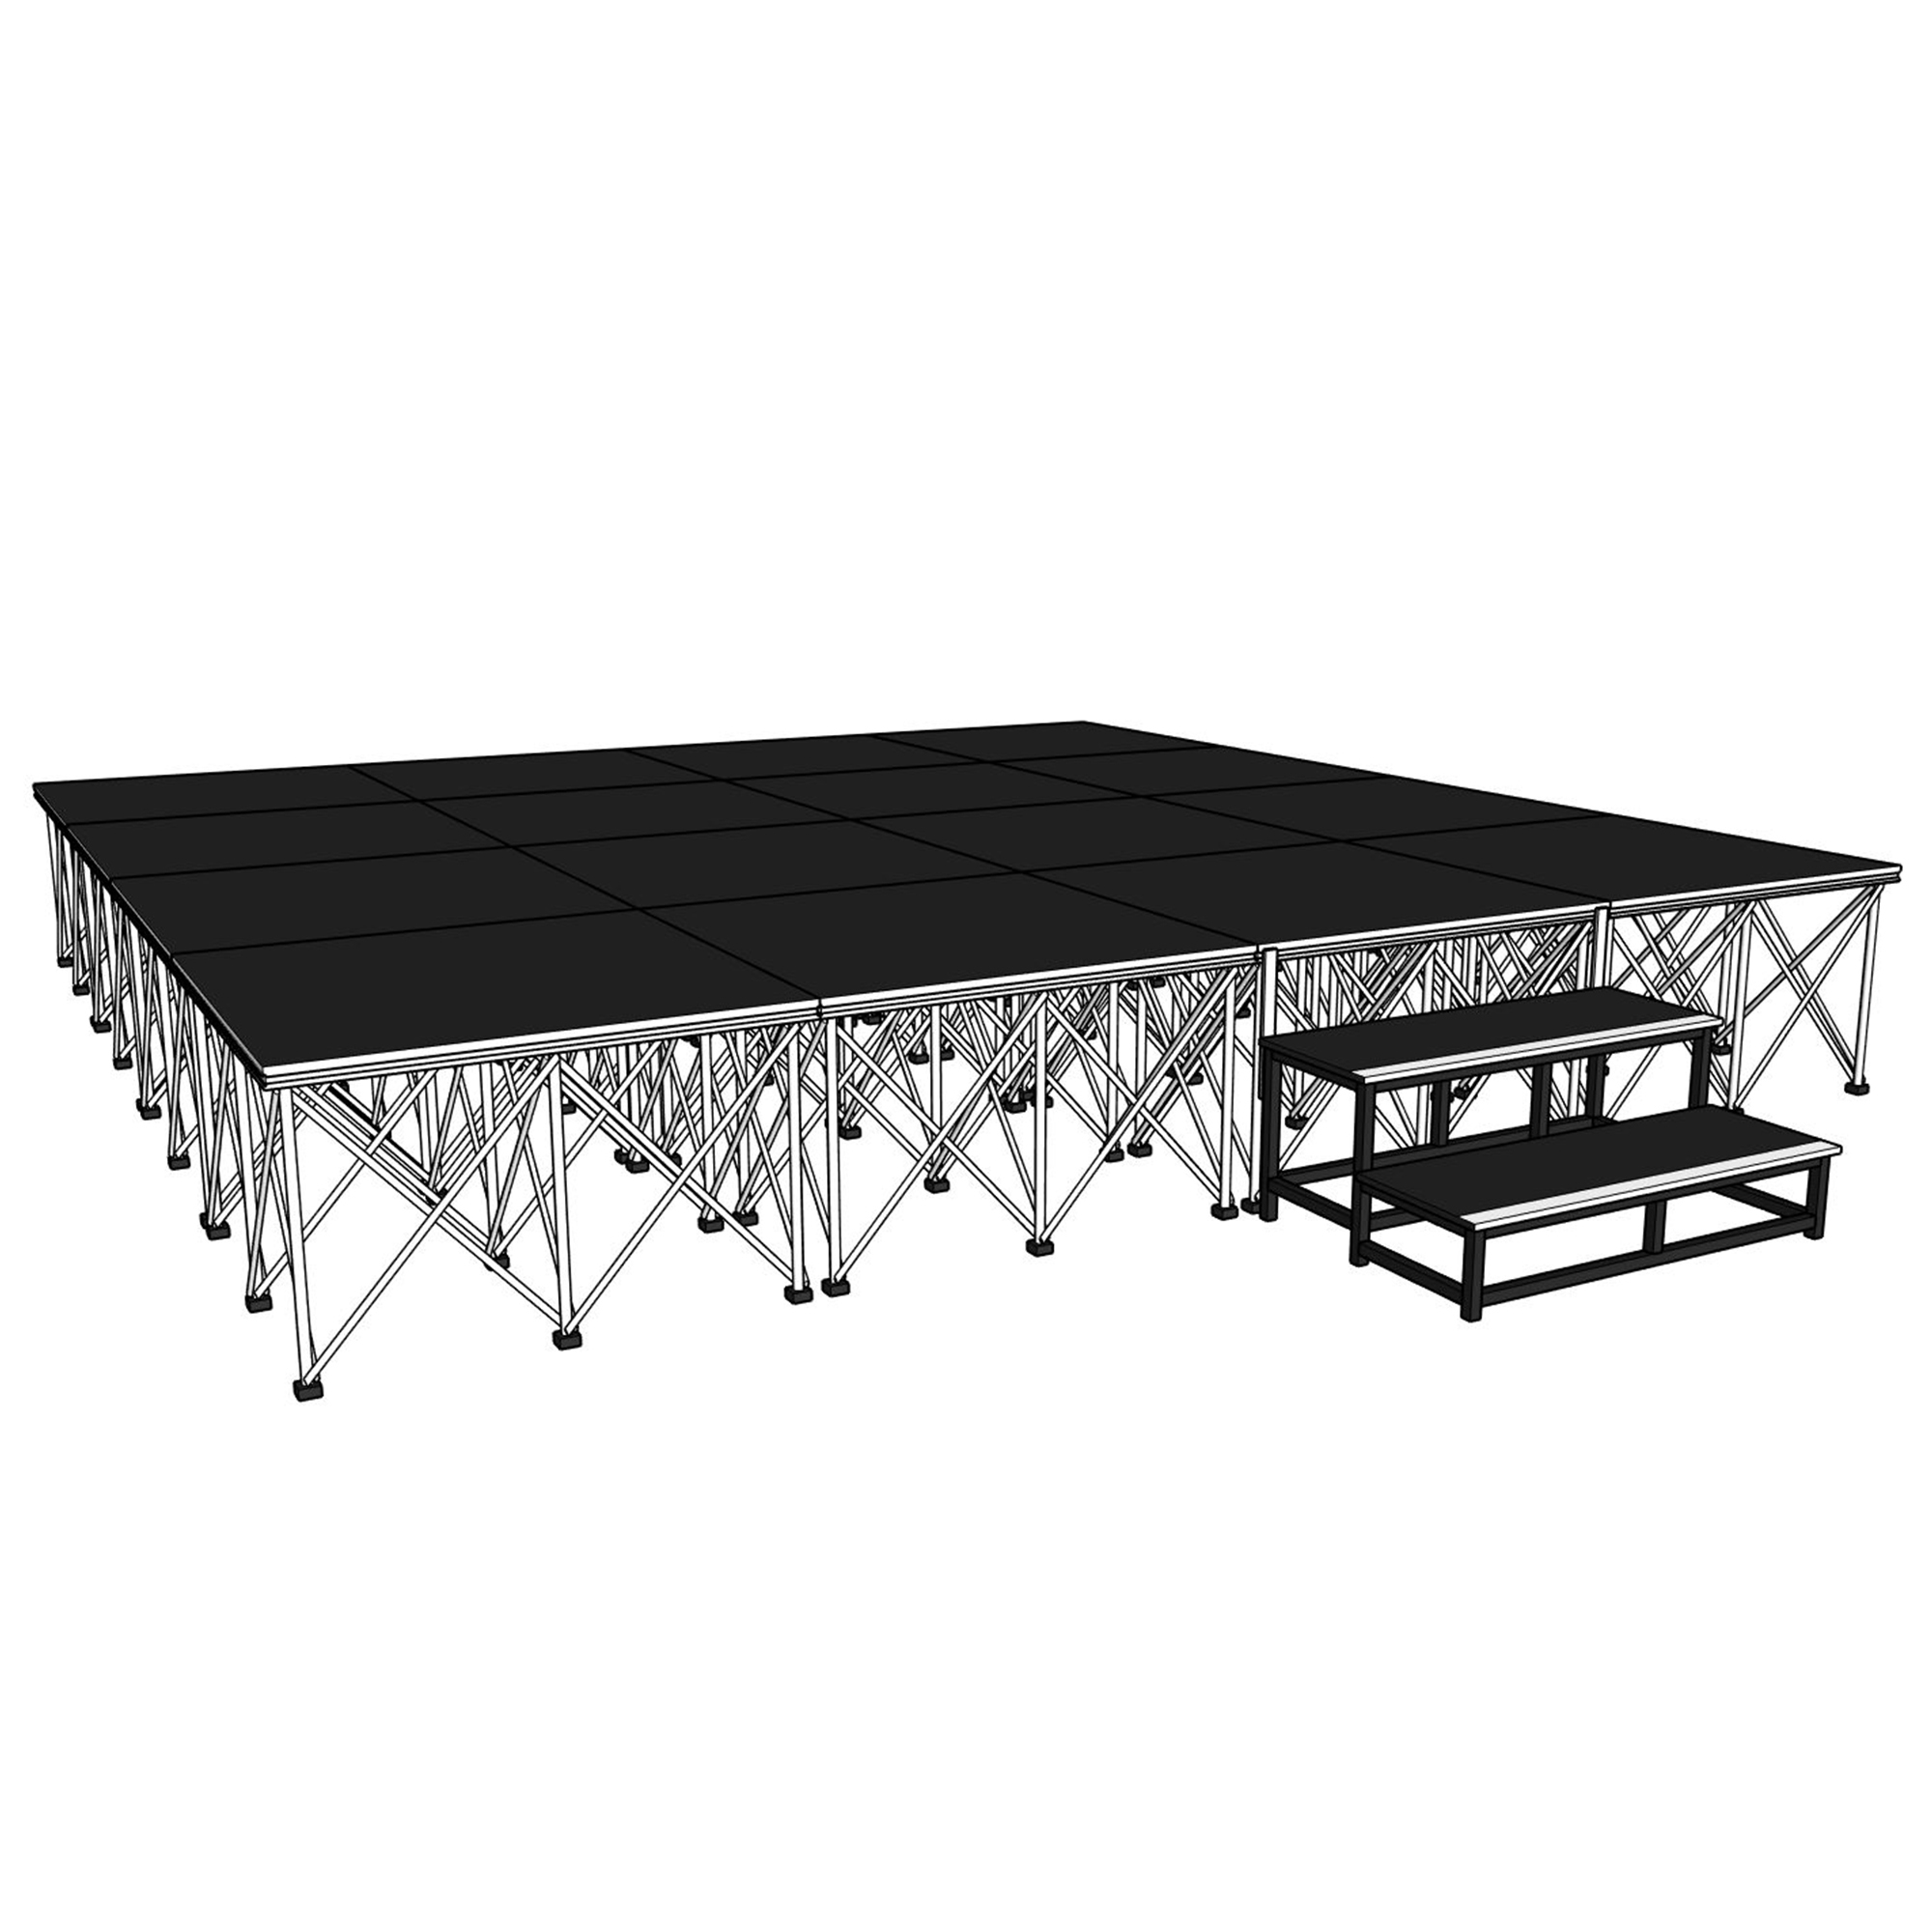 4m X 4m Portable Stage Platforms With 60cm Risers Stage Concepts